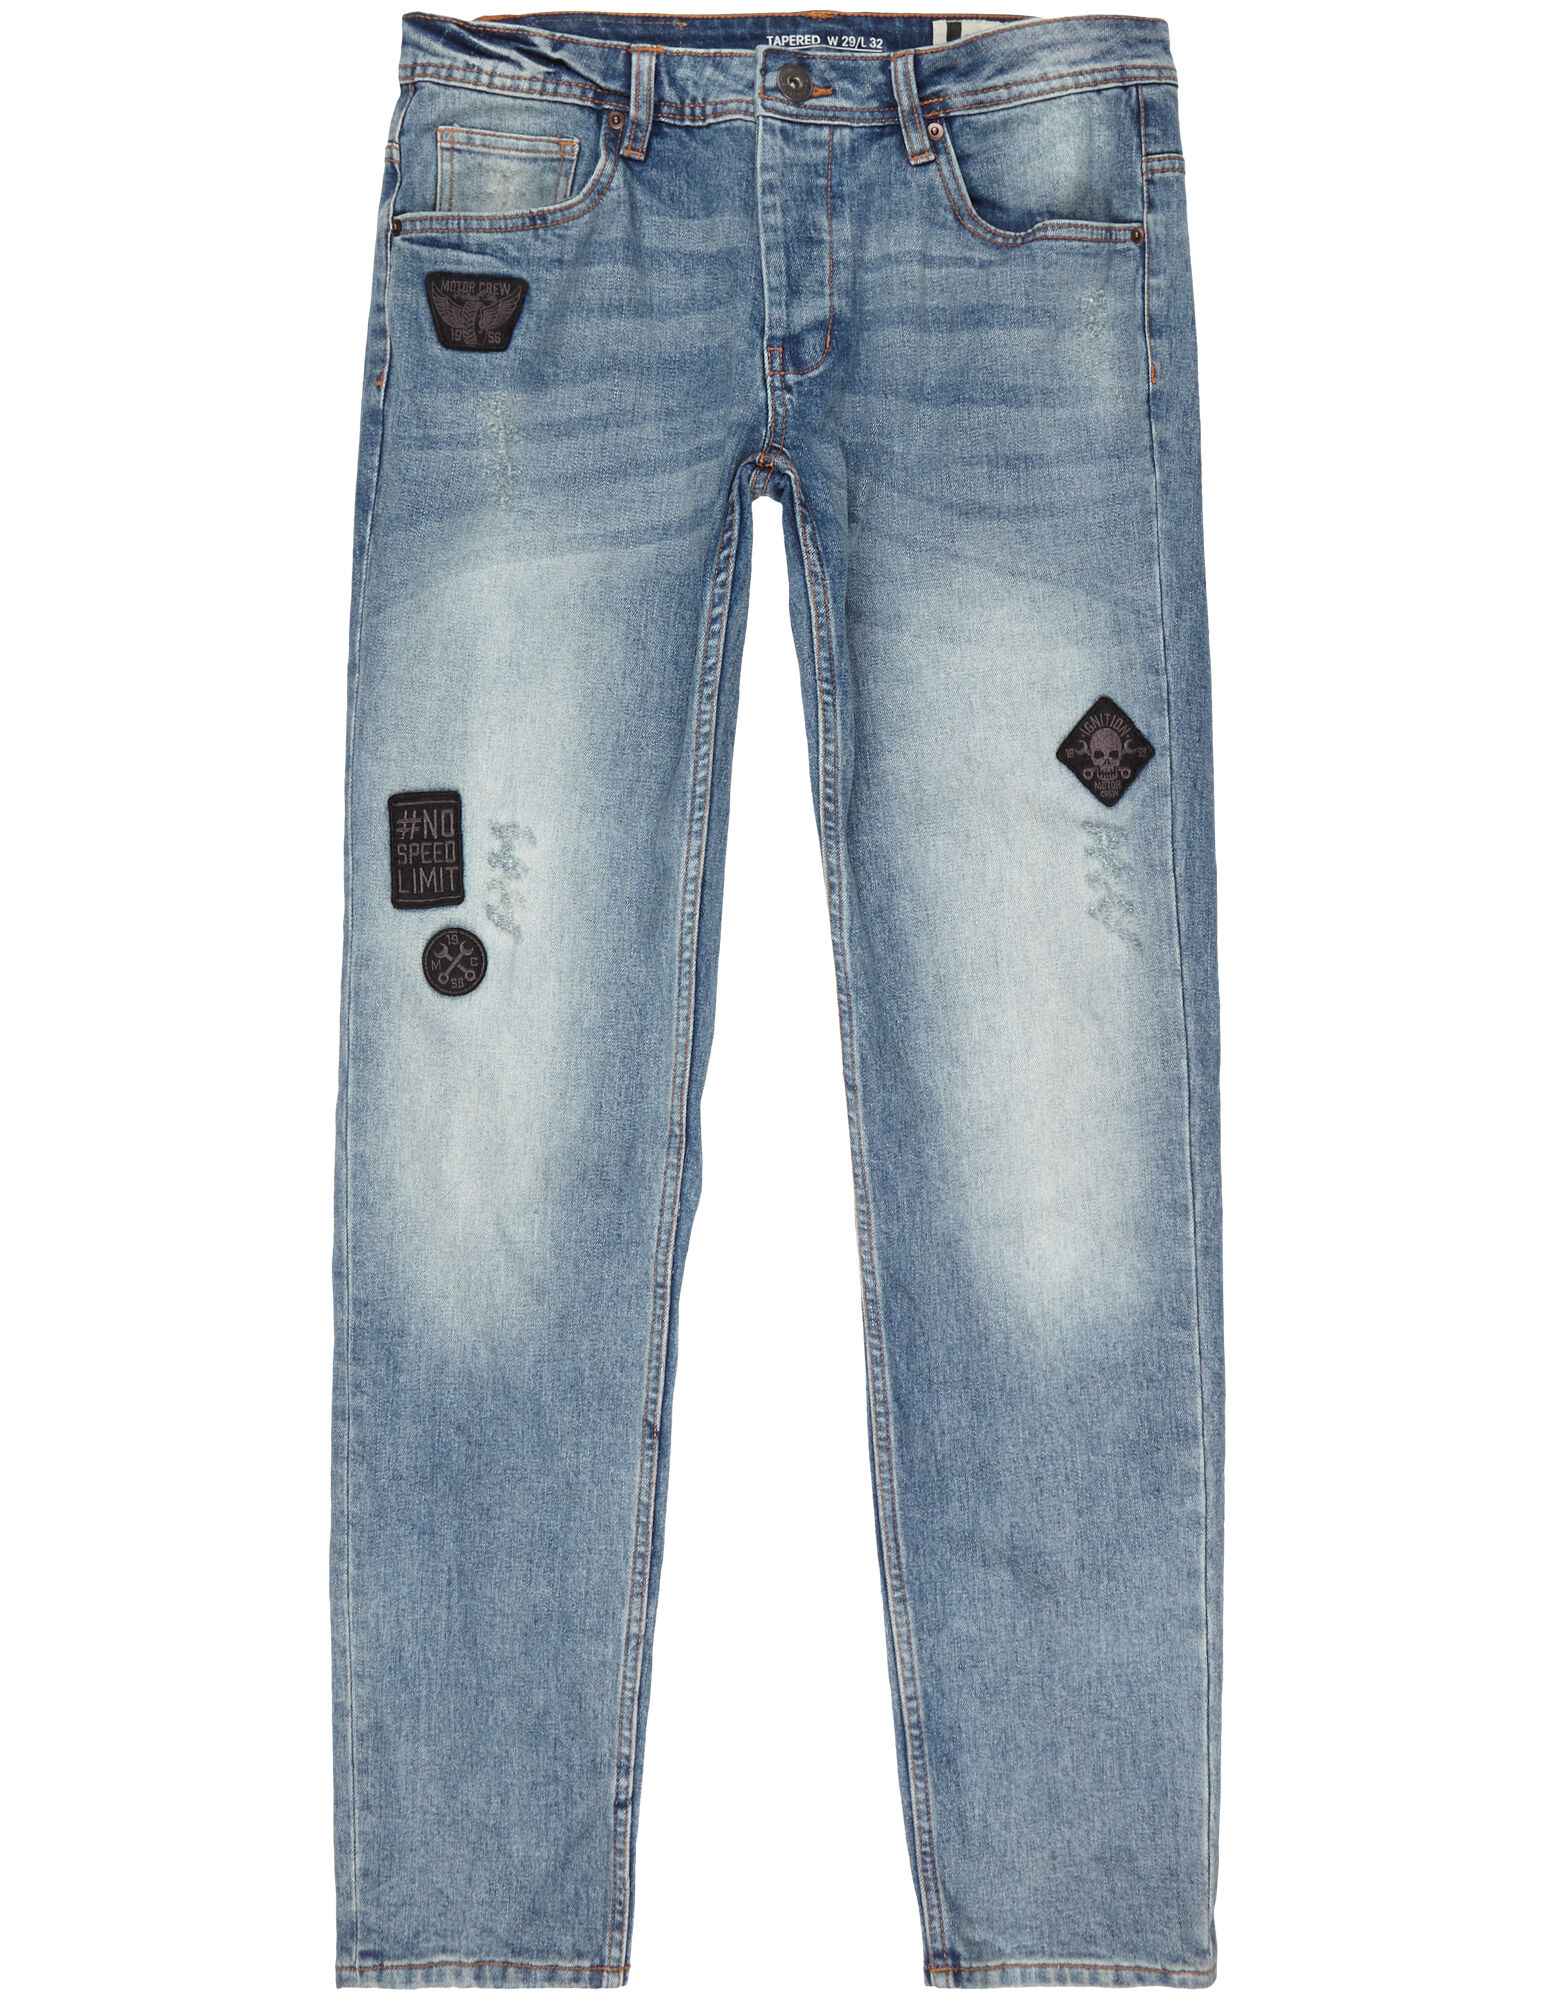 Herren Tapered Fit Jeans mit Patches